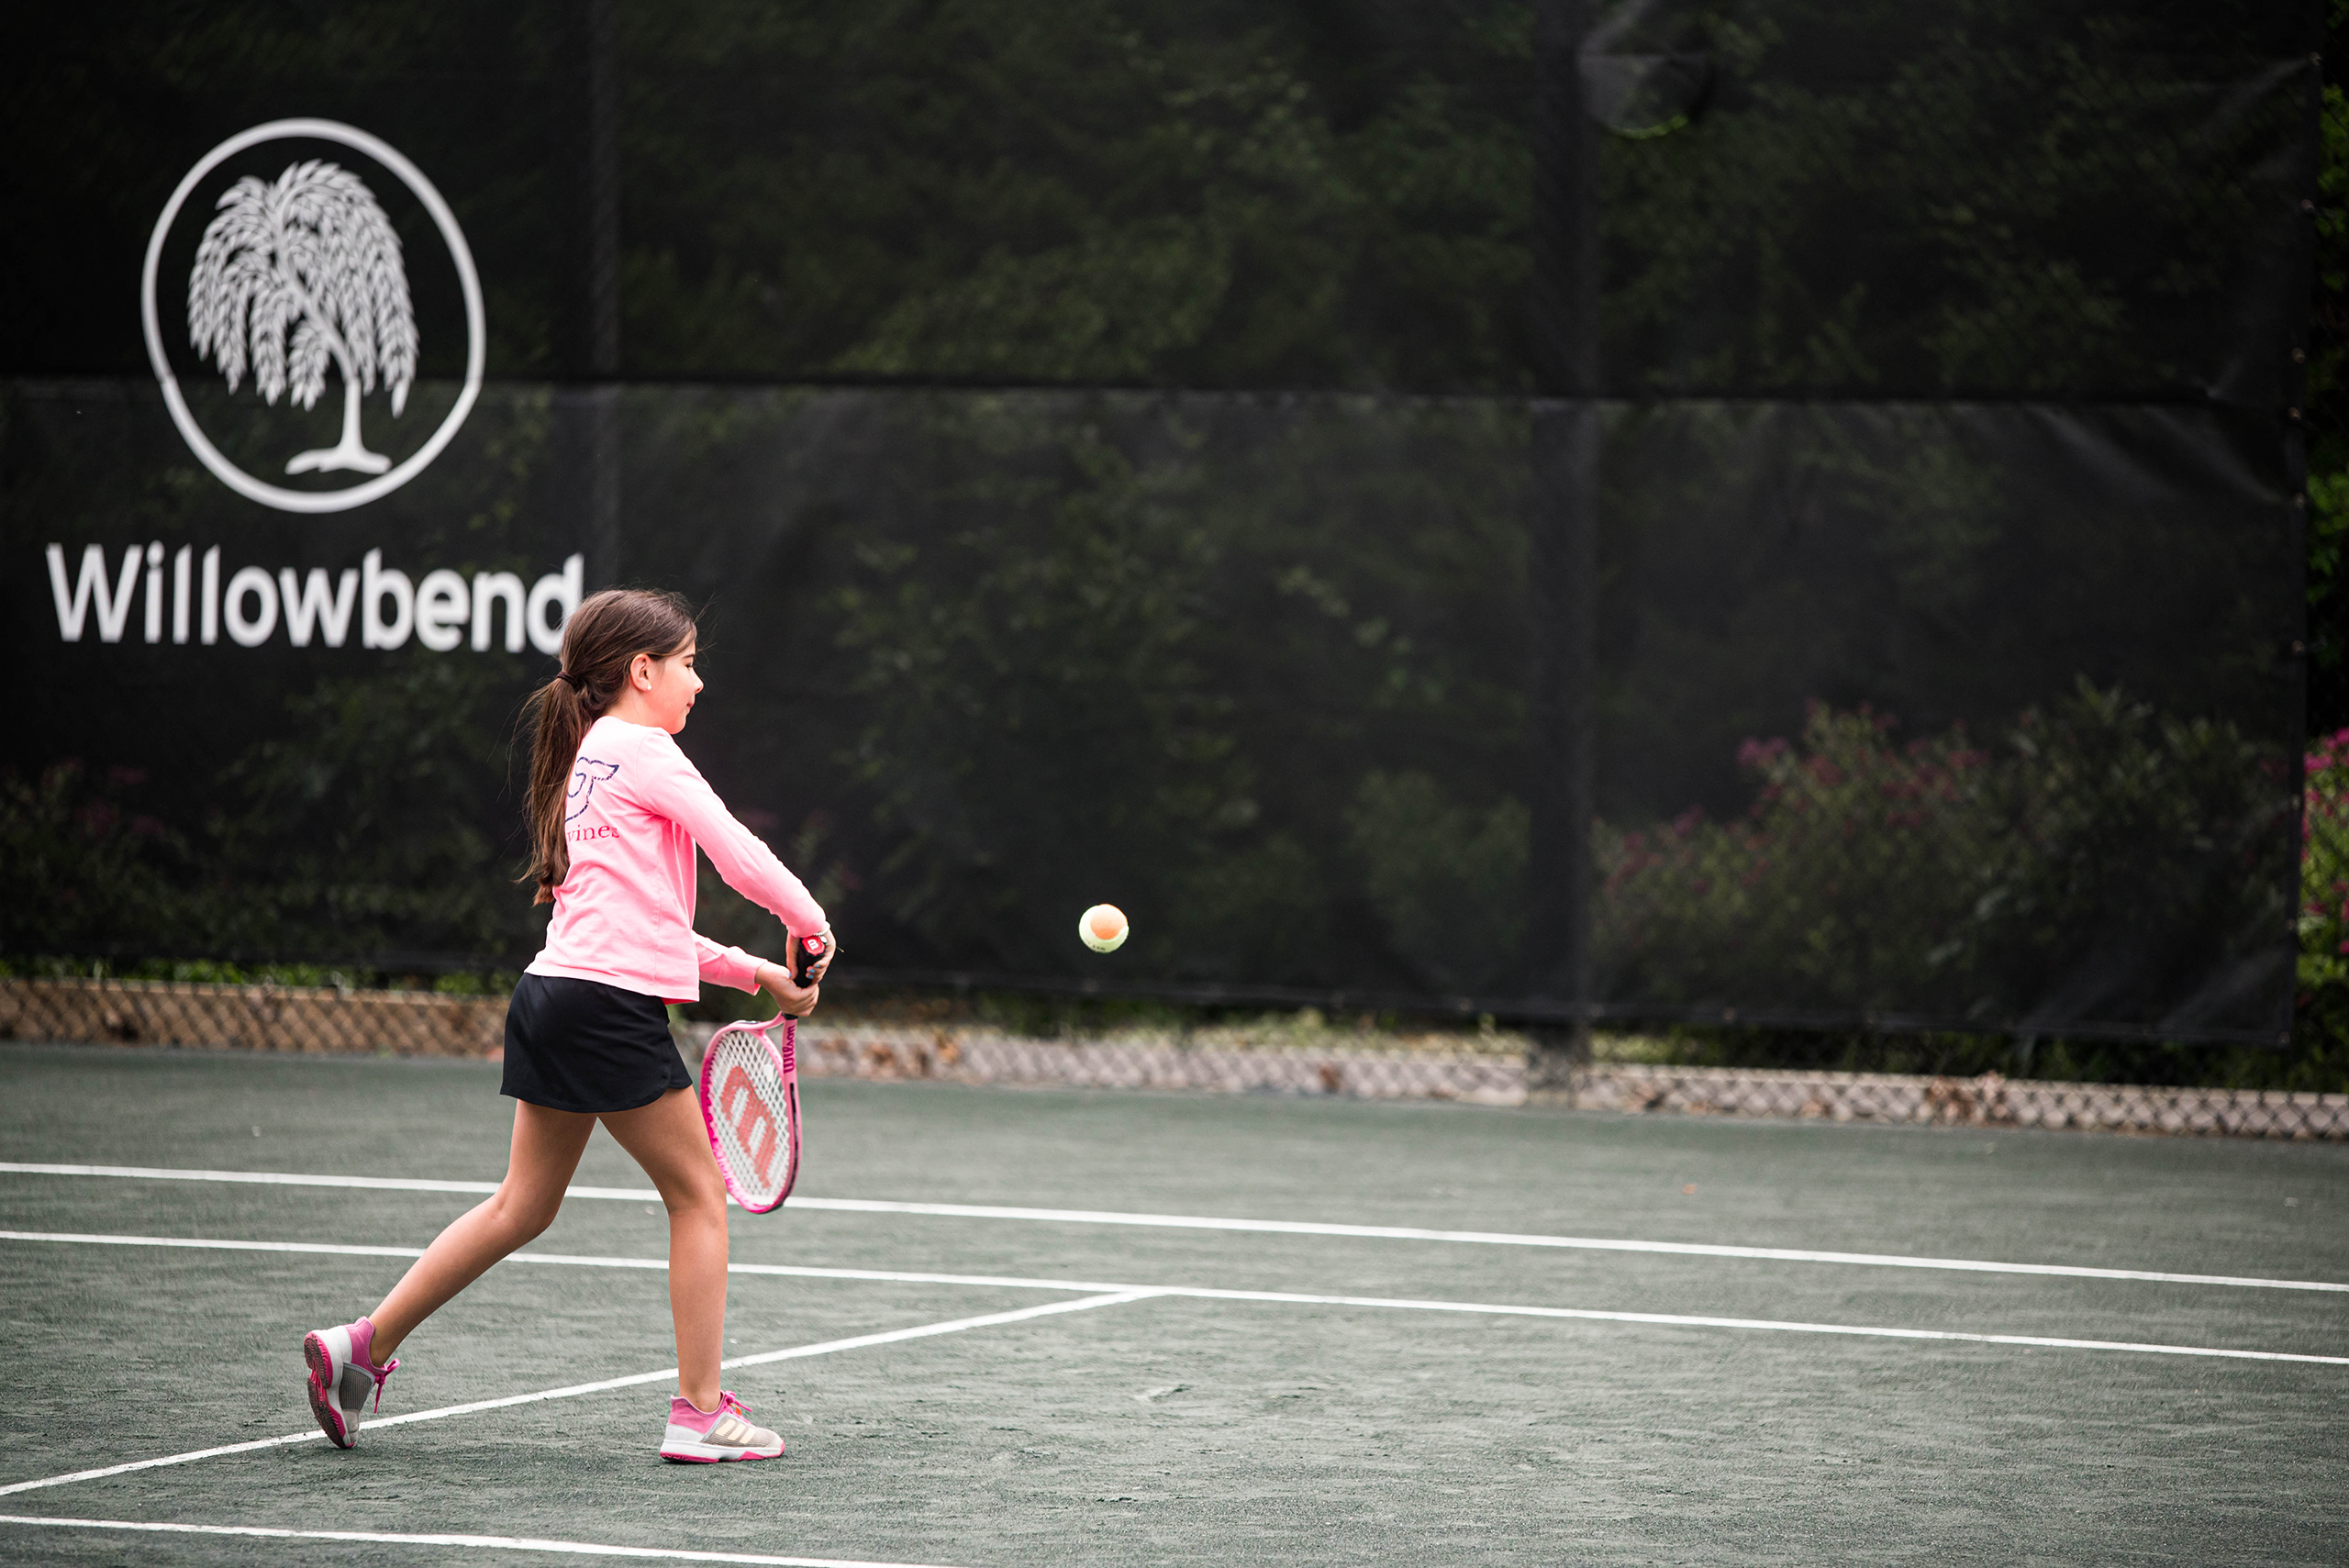 Young girl playing tennis at Willowbend